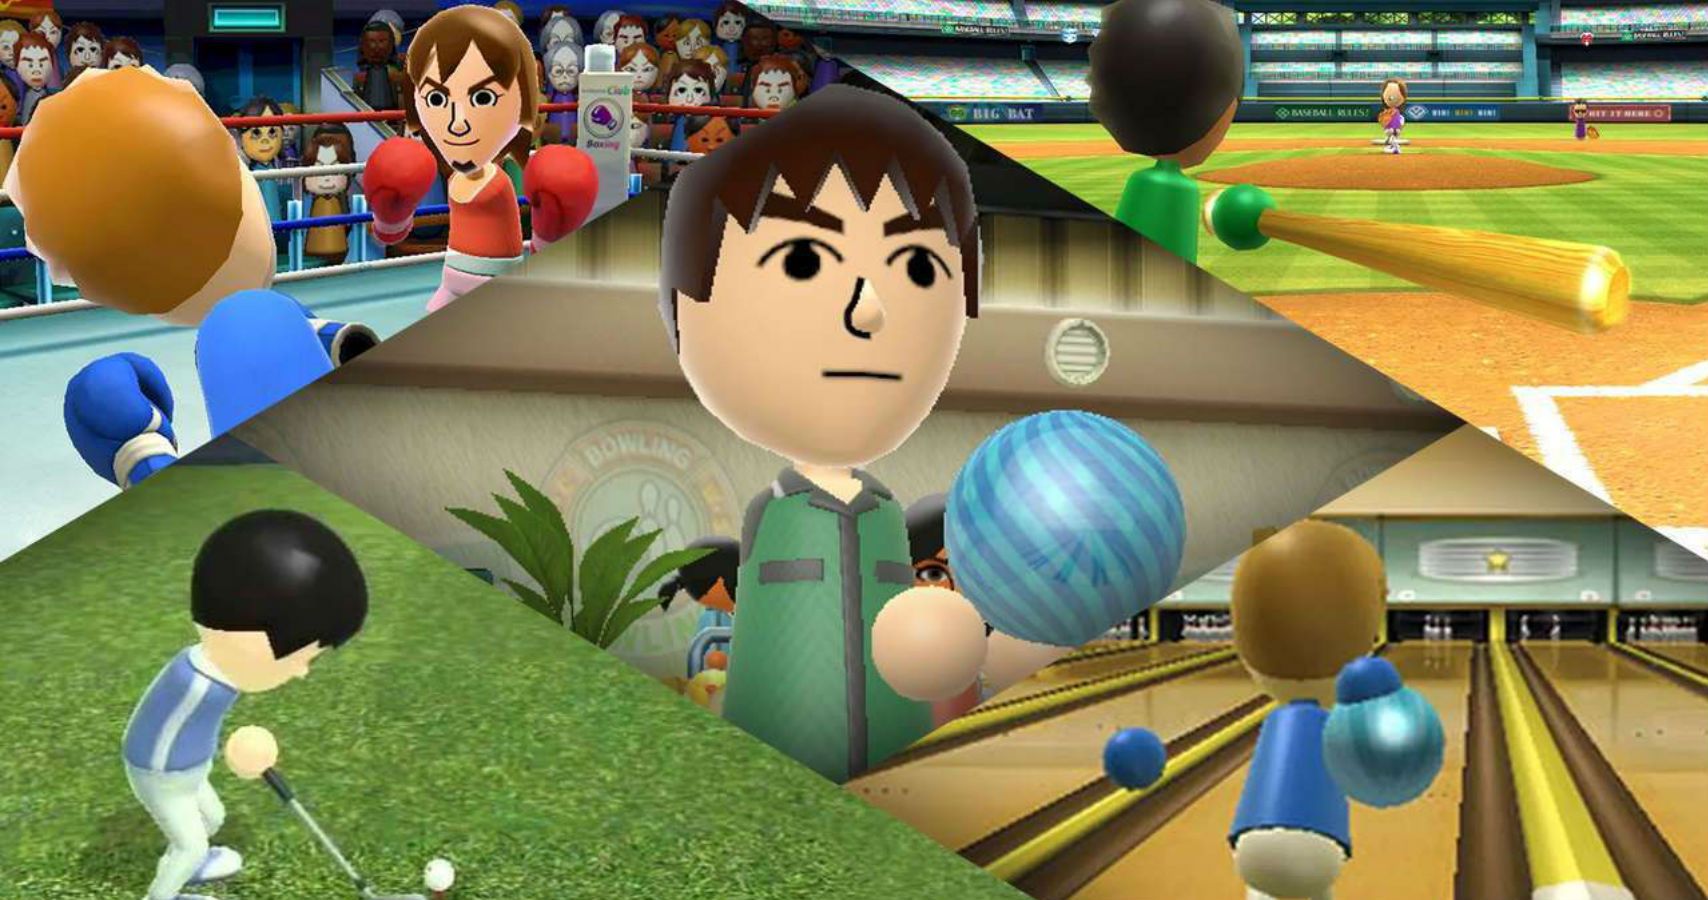 wii bowling for switch